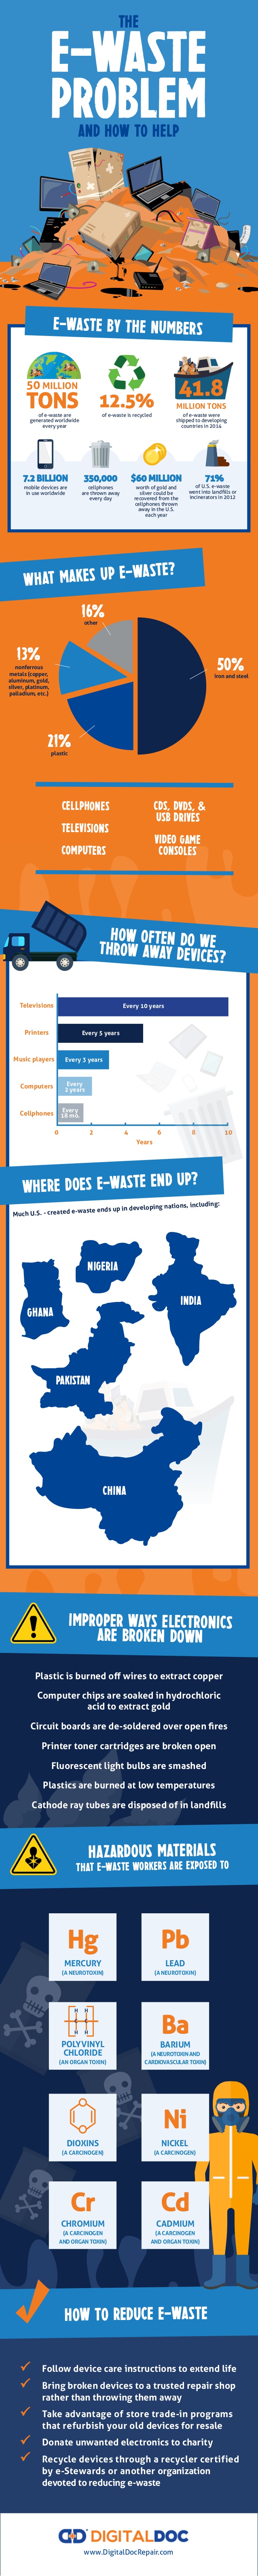 E-waste problems and solutions [Infographic] | ecogreenlove